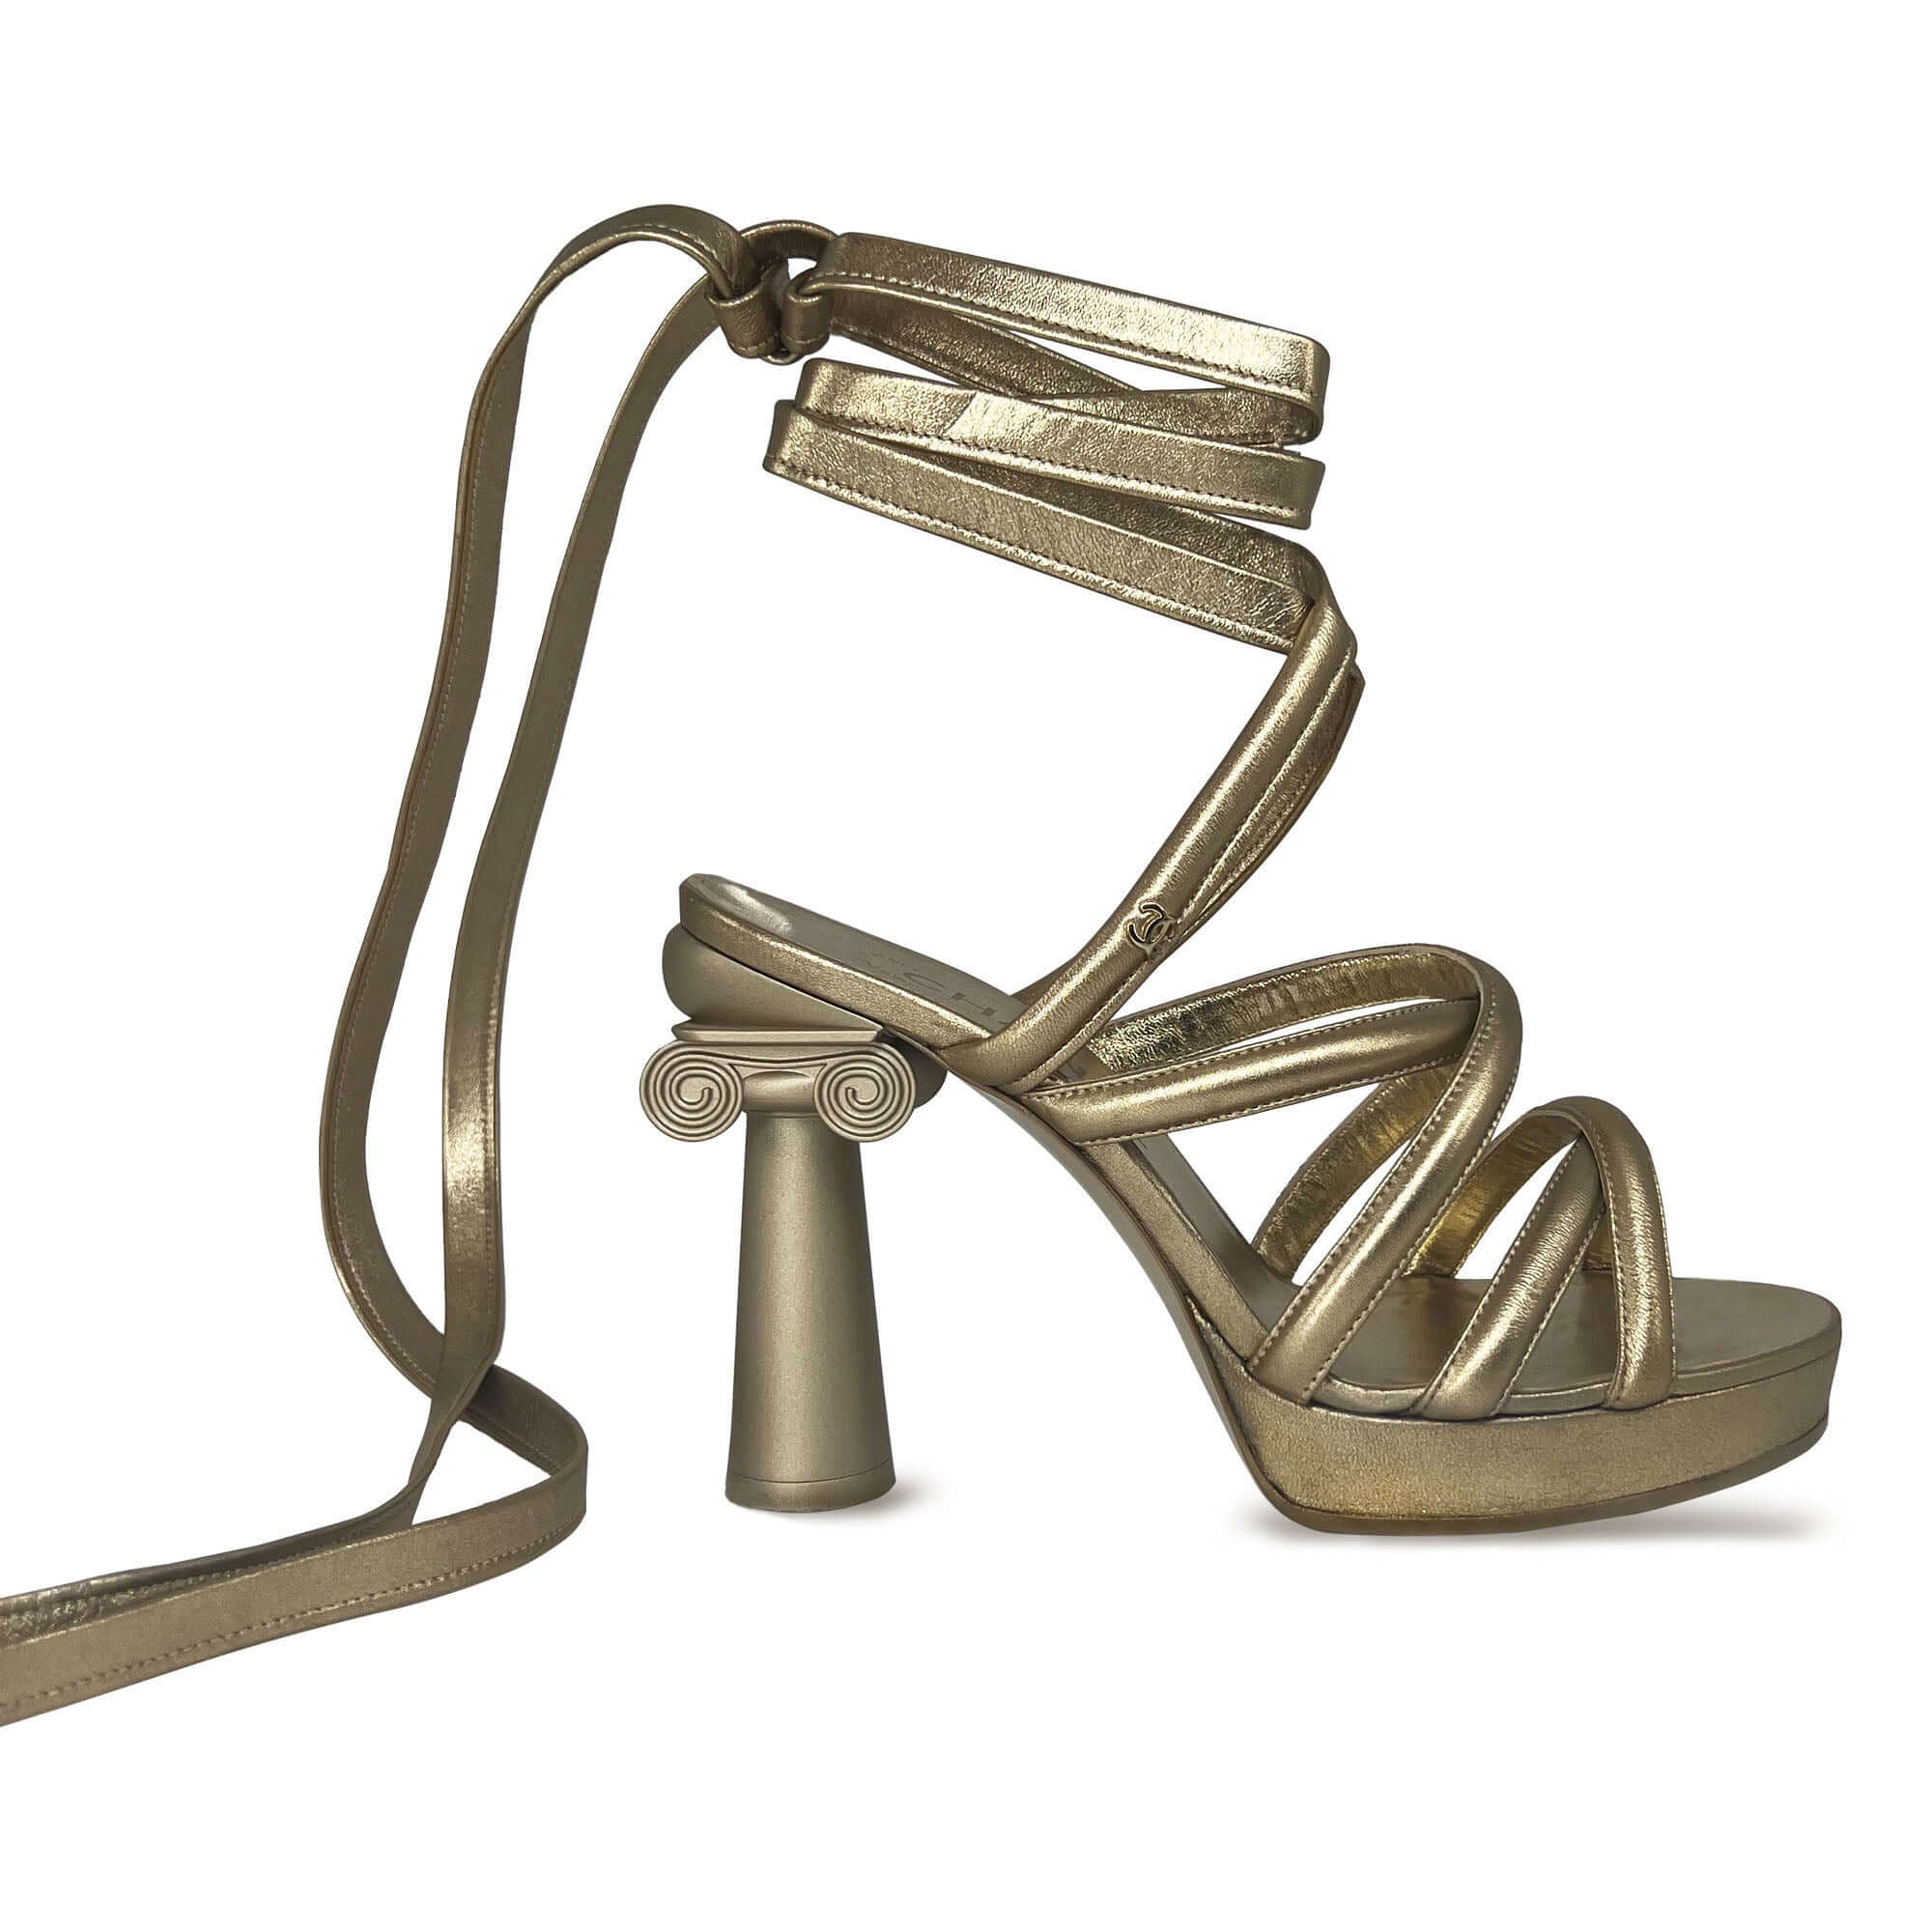 Chanel runway champagne gold leather tie-up high heel sandals